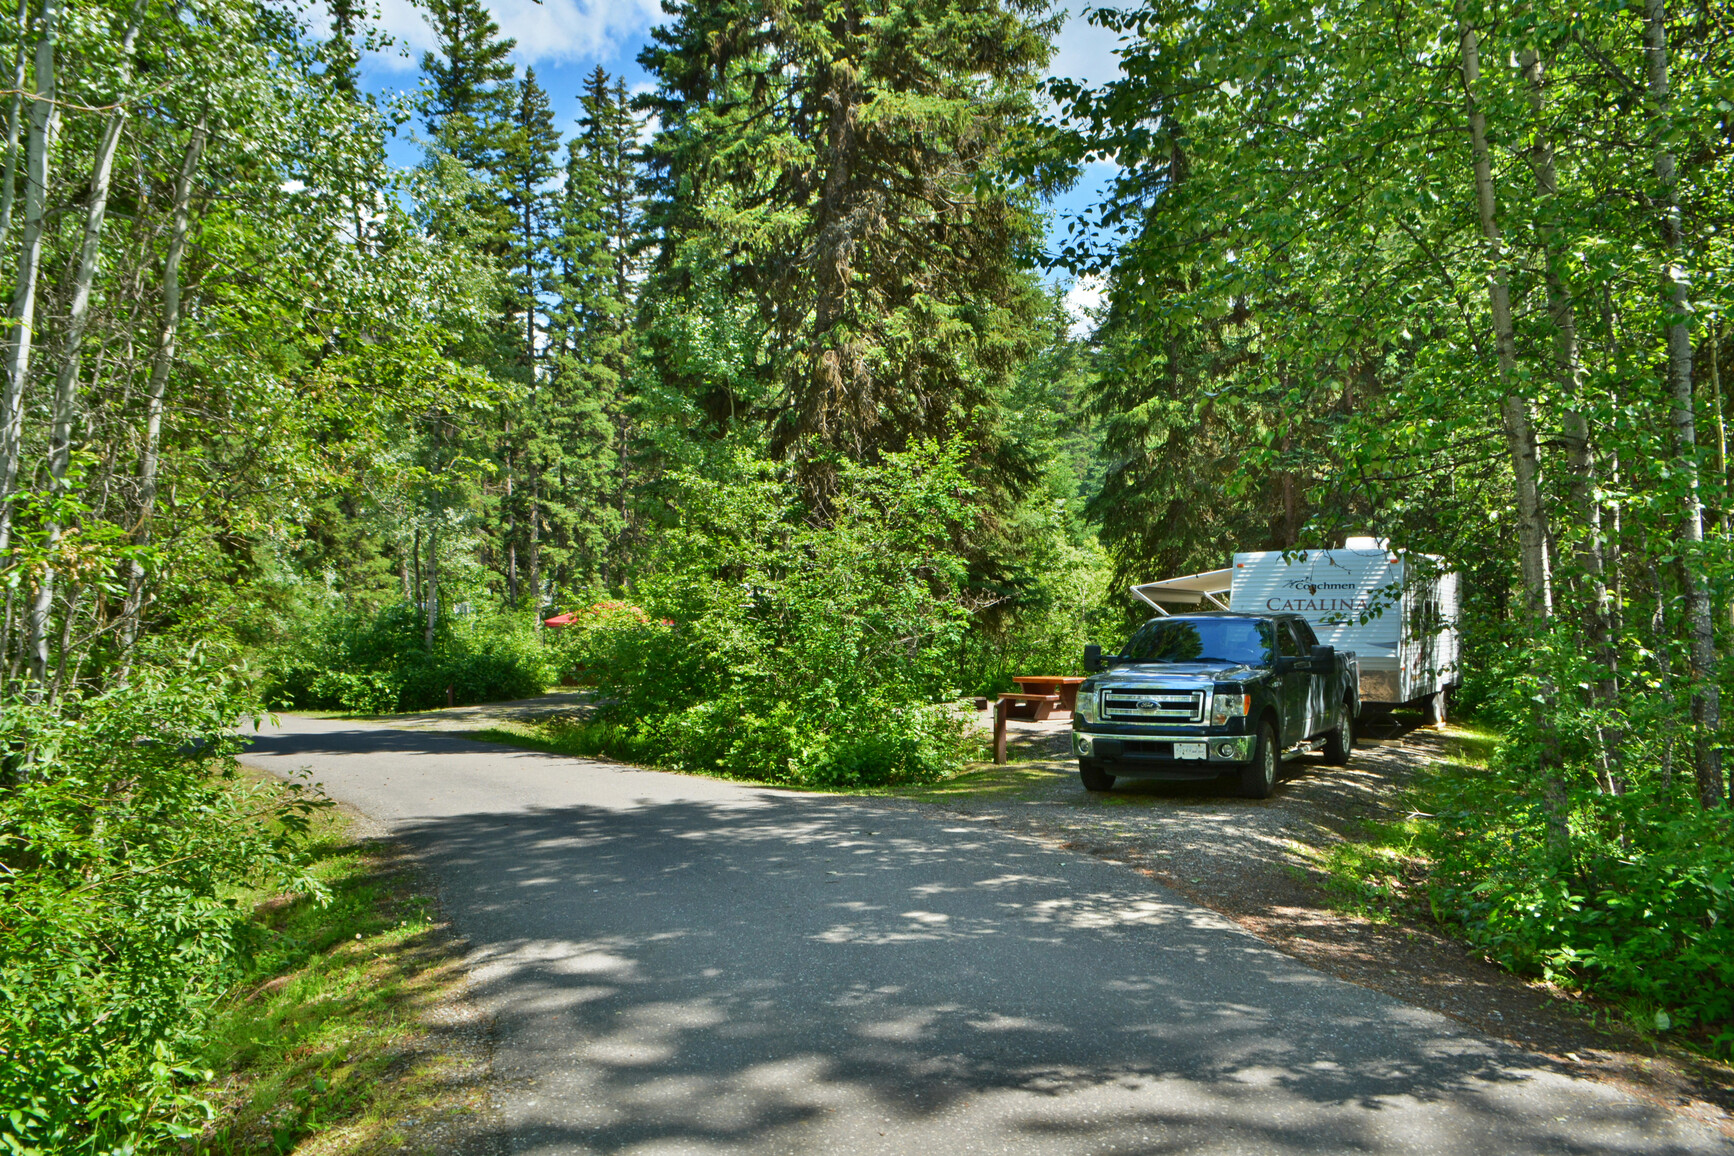 The campground at Ten Mile Lake. A truck and trailer are in on site. The campground location is in the forest.